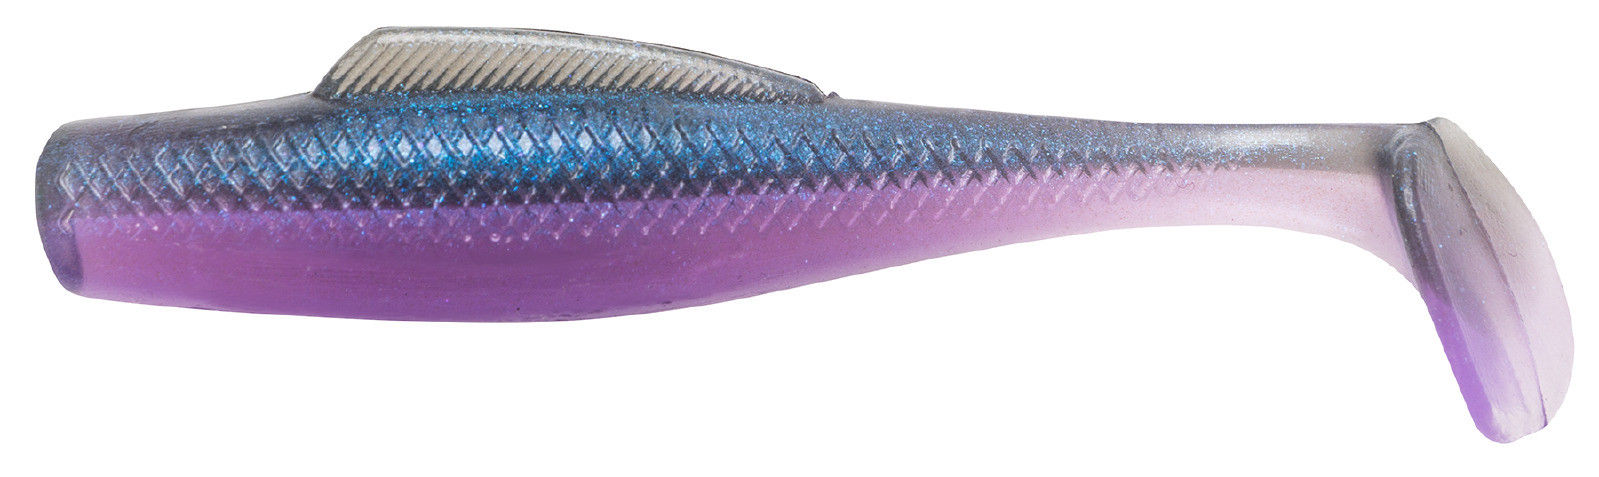 Cast Prodigy Paddle Tail Soft Plastic Lure 3 Inch